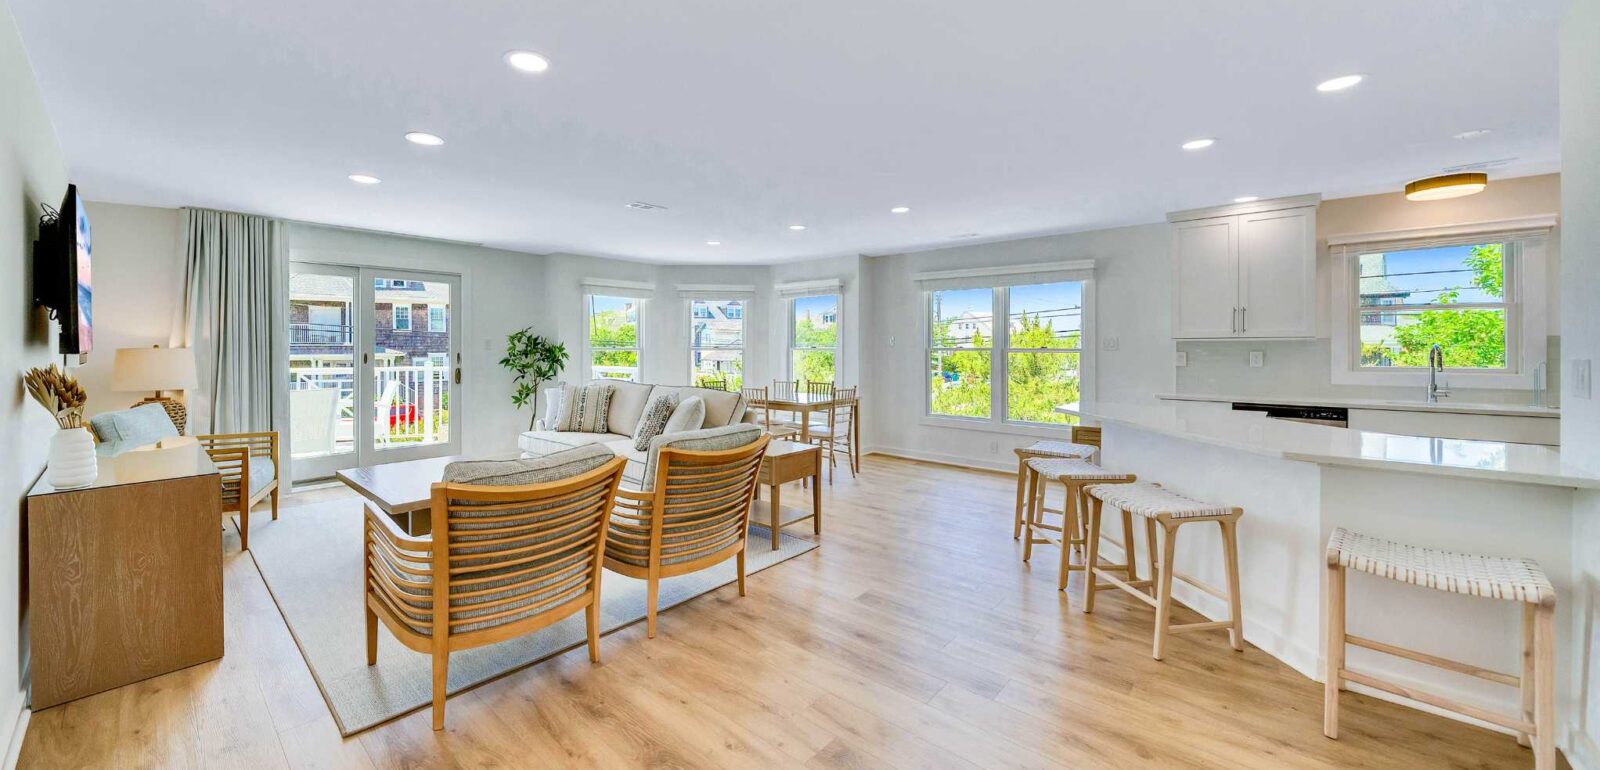 Open living dining and kitchen space. Luxury 3 br 2.5 bath summer rental in Cape May sleeps up to 10 at Mahalo - Cape May's Newest Beachfront Hotel. Perks of a hotel with the comfort of a summer house rental in Cape May, NJ.